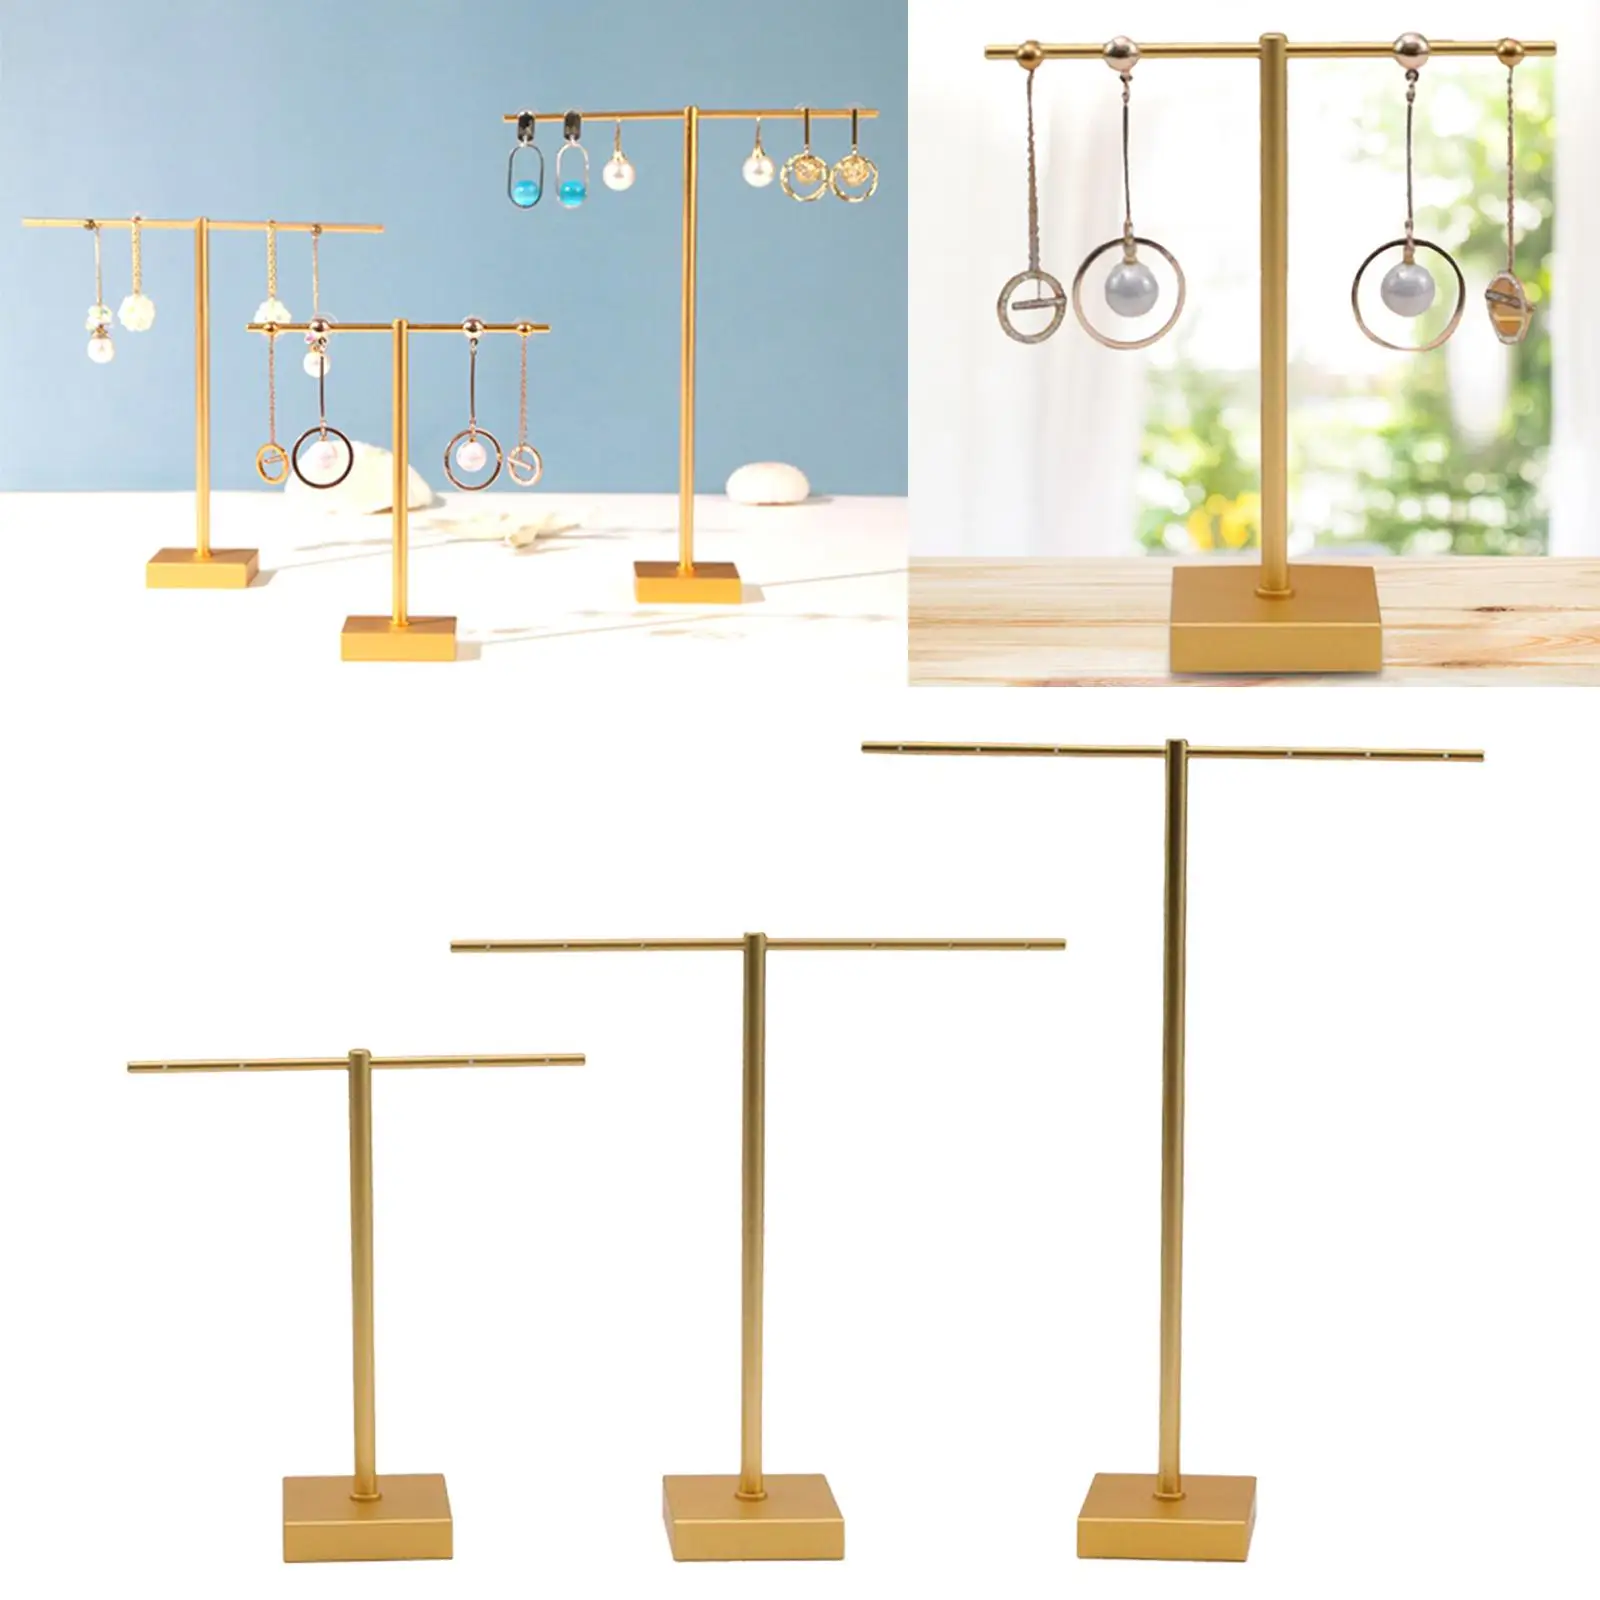 Jewelry Display Stand Storage Shelf T Shaped Hanging with Base Earrings Holder for Necklace Earrings Show Jewelry Ring Tabletop